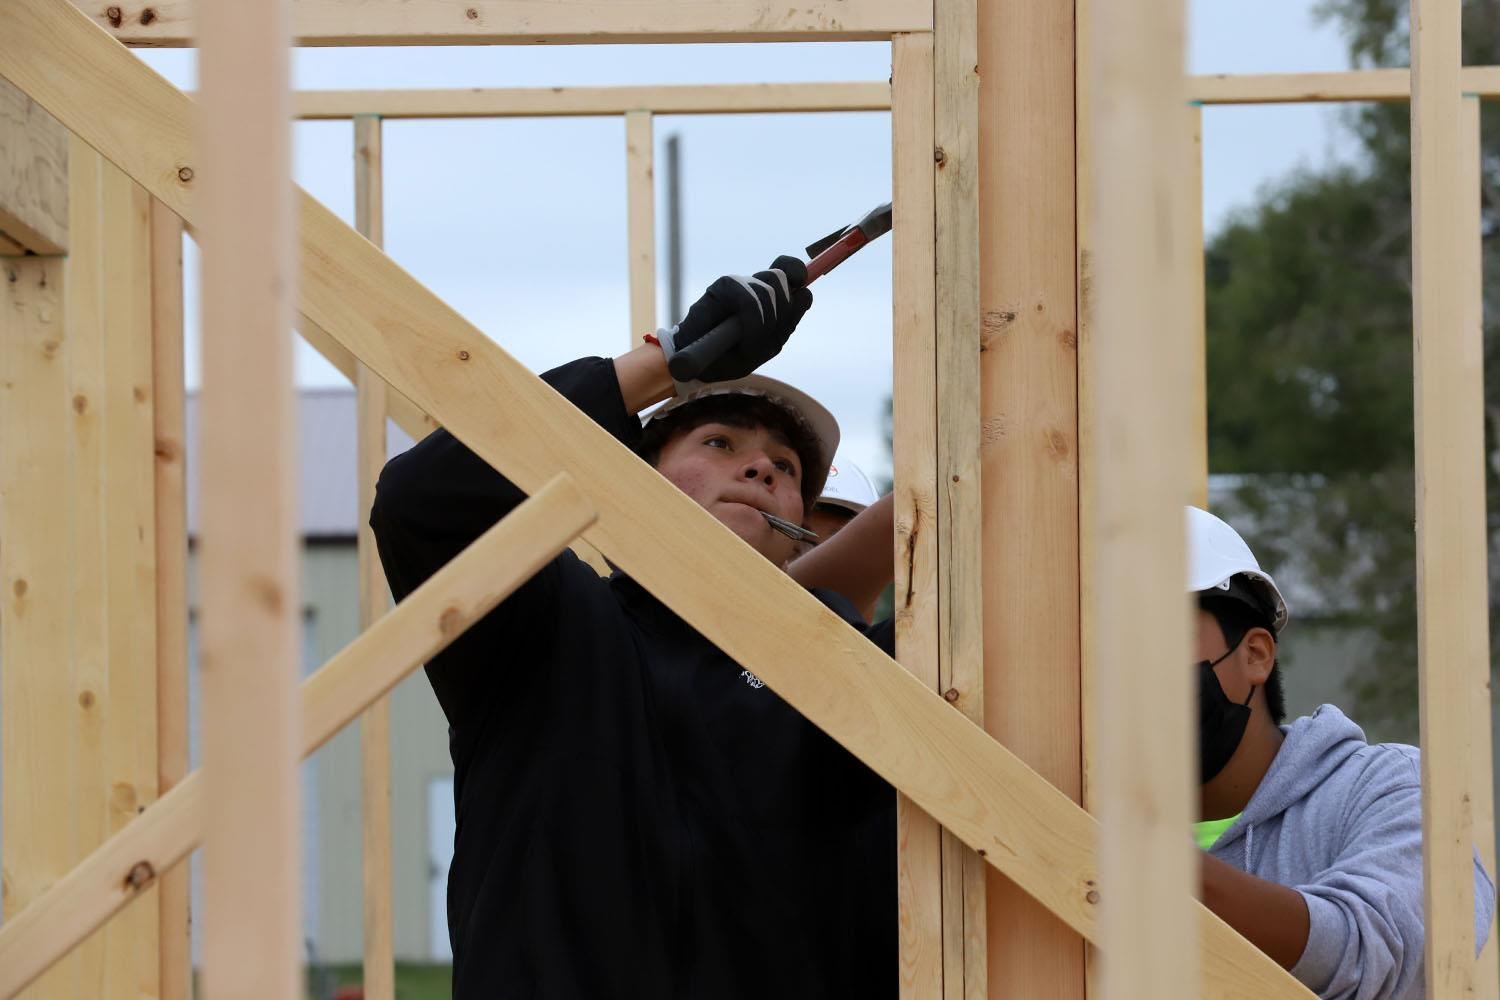 GISH Construction Pathway students framing a house build